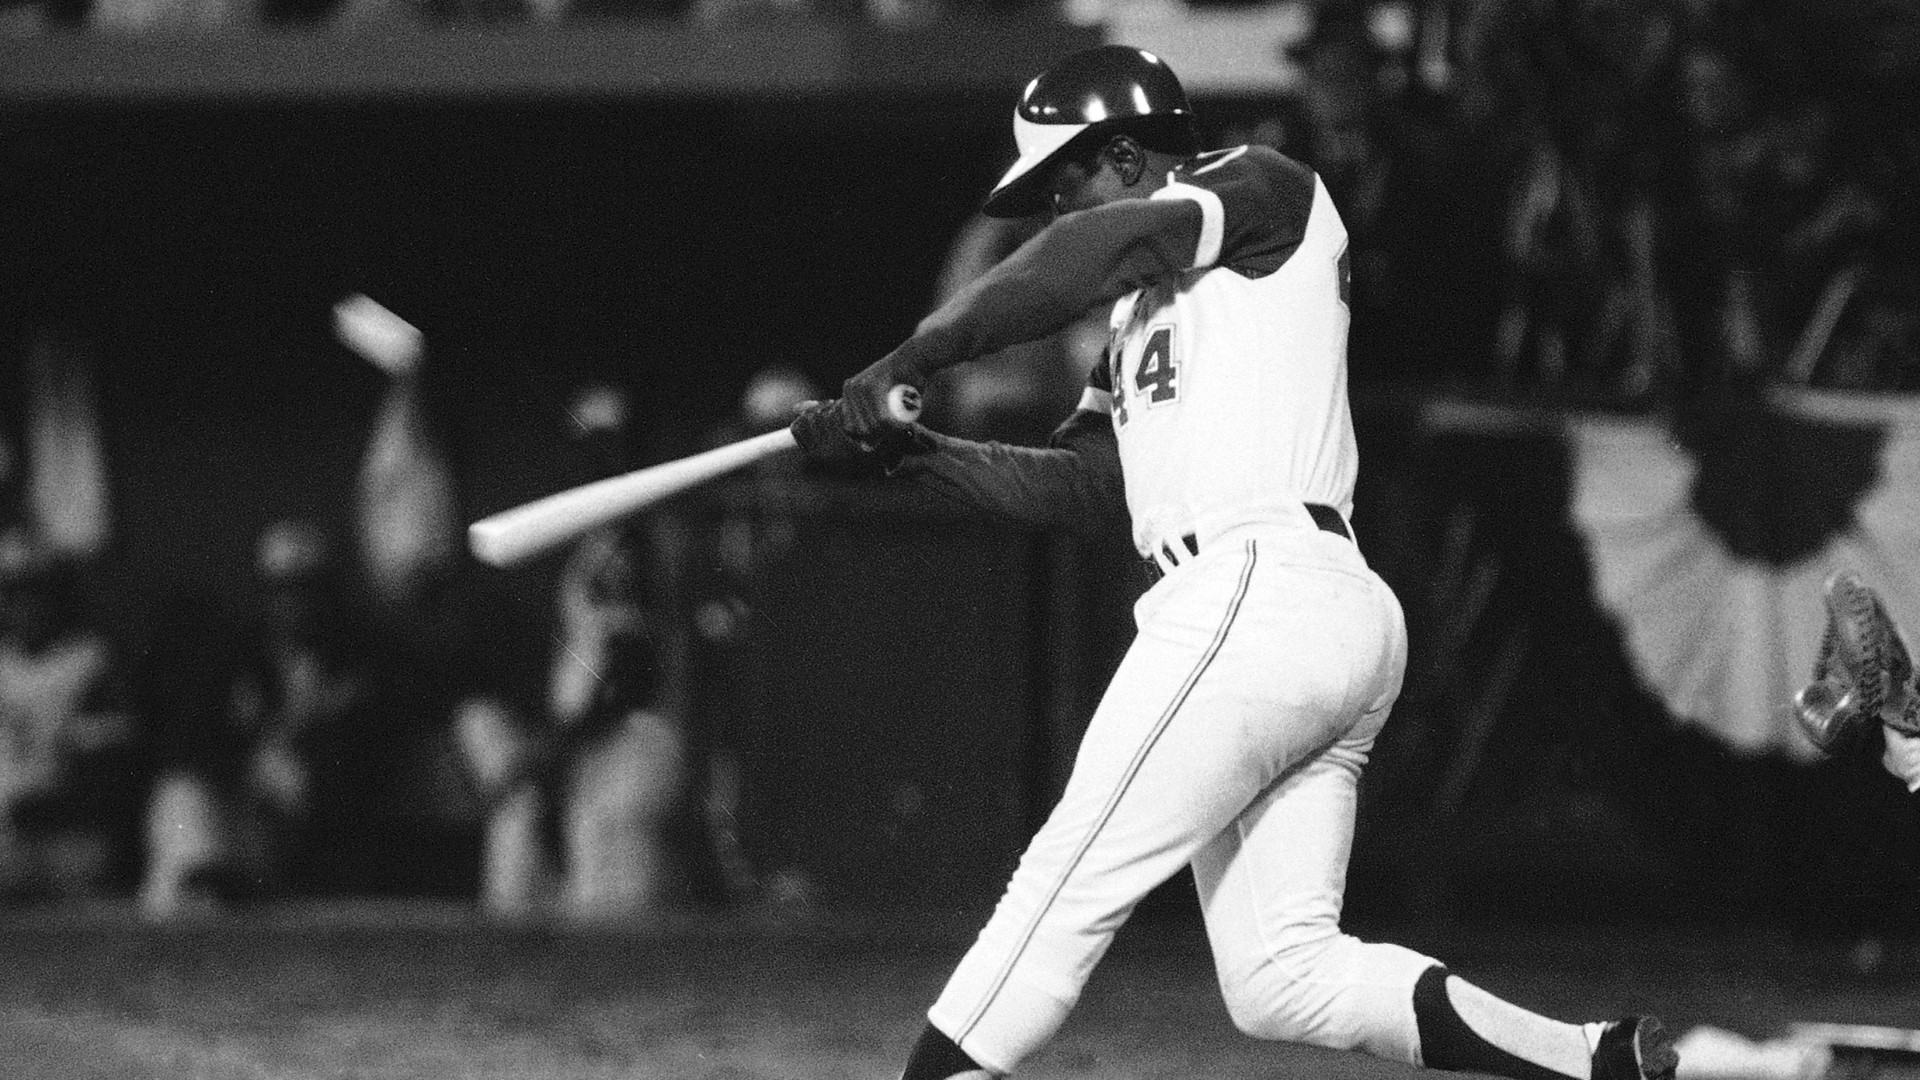 "When he broke Babe Ruth's record, that home run represented Hank Aaron's achievements. For us Black kids, that shot over the wall made us proud, too."